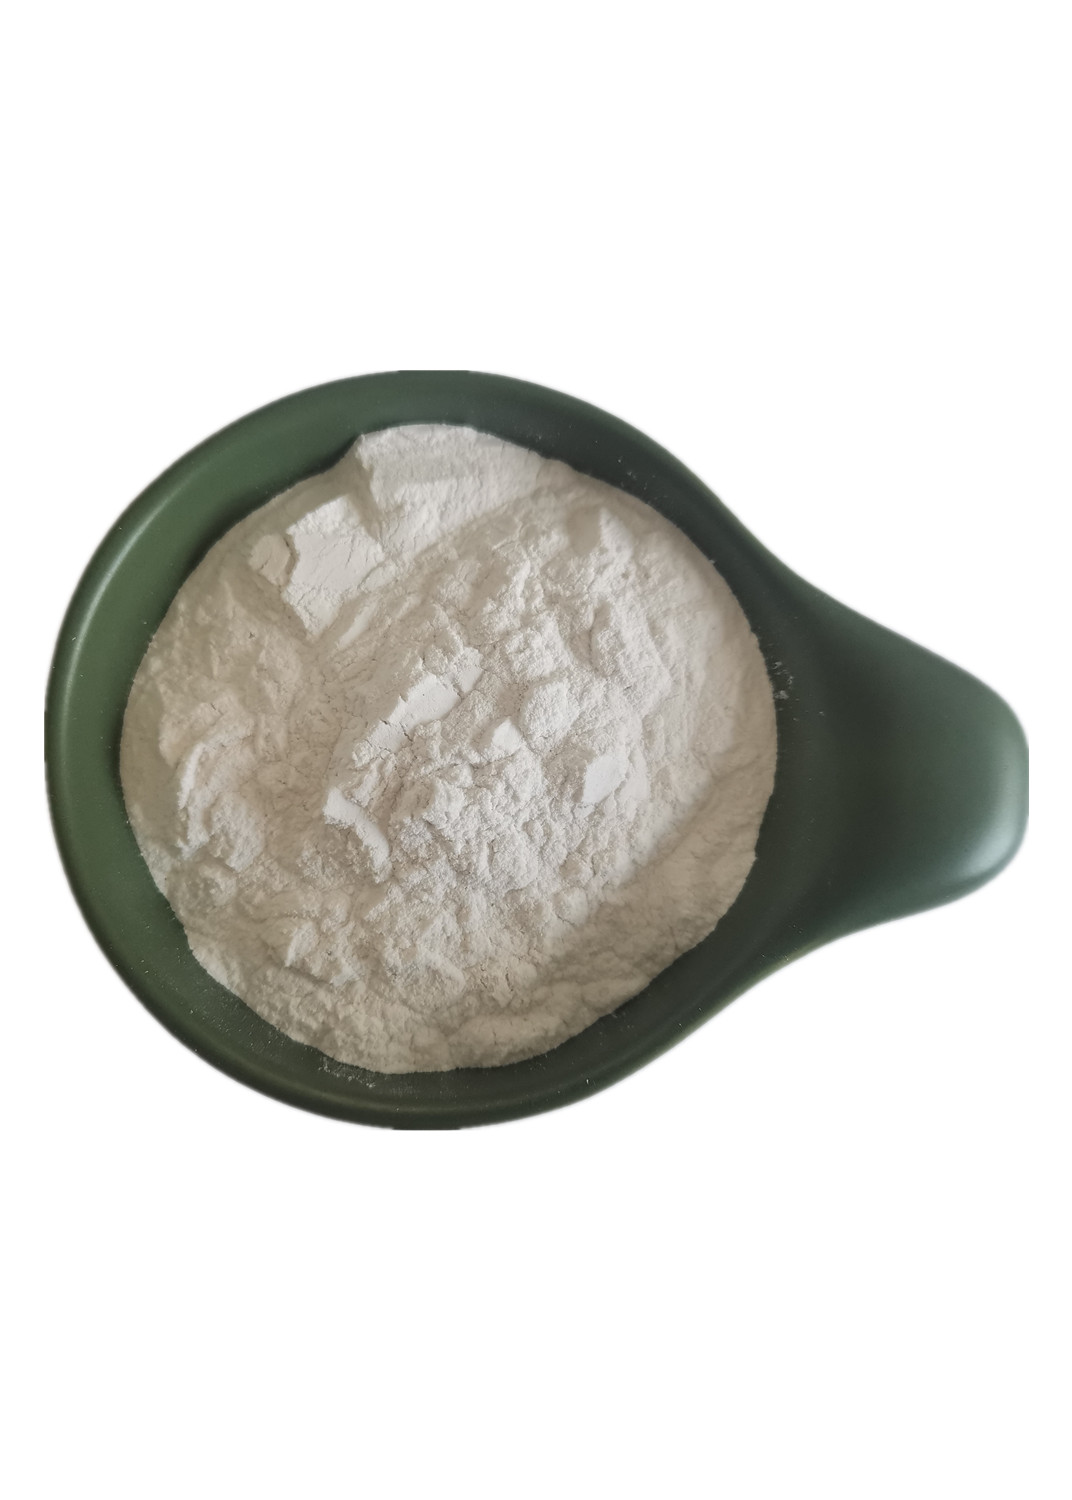 Factory supplied Horticulture Diatomite - Diatomite Earth Powder Wholesale Price Manufacturer Direct Supply for Filter Use Free Samples – Yuantong